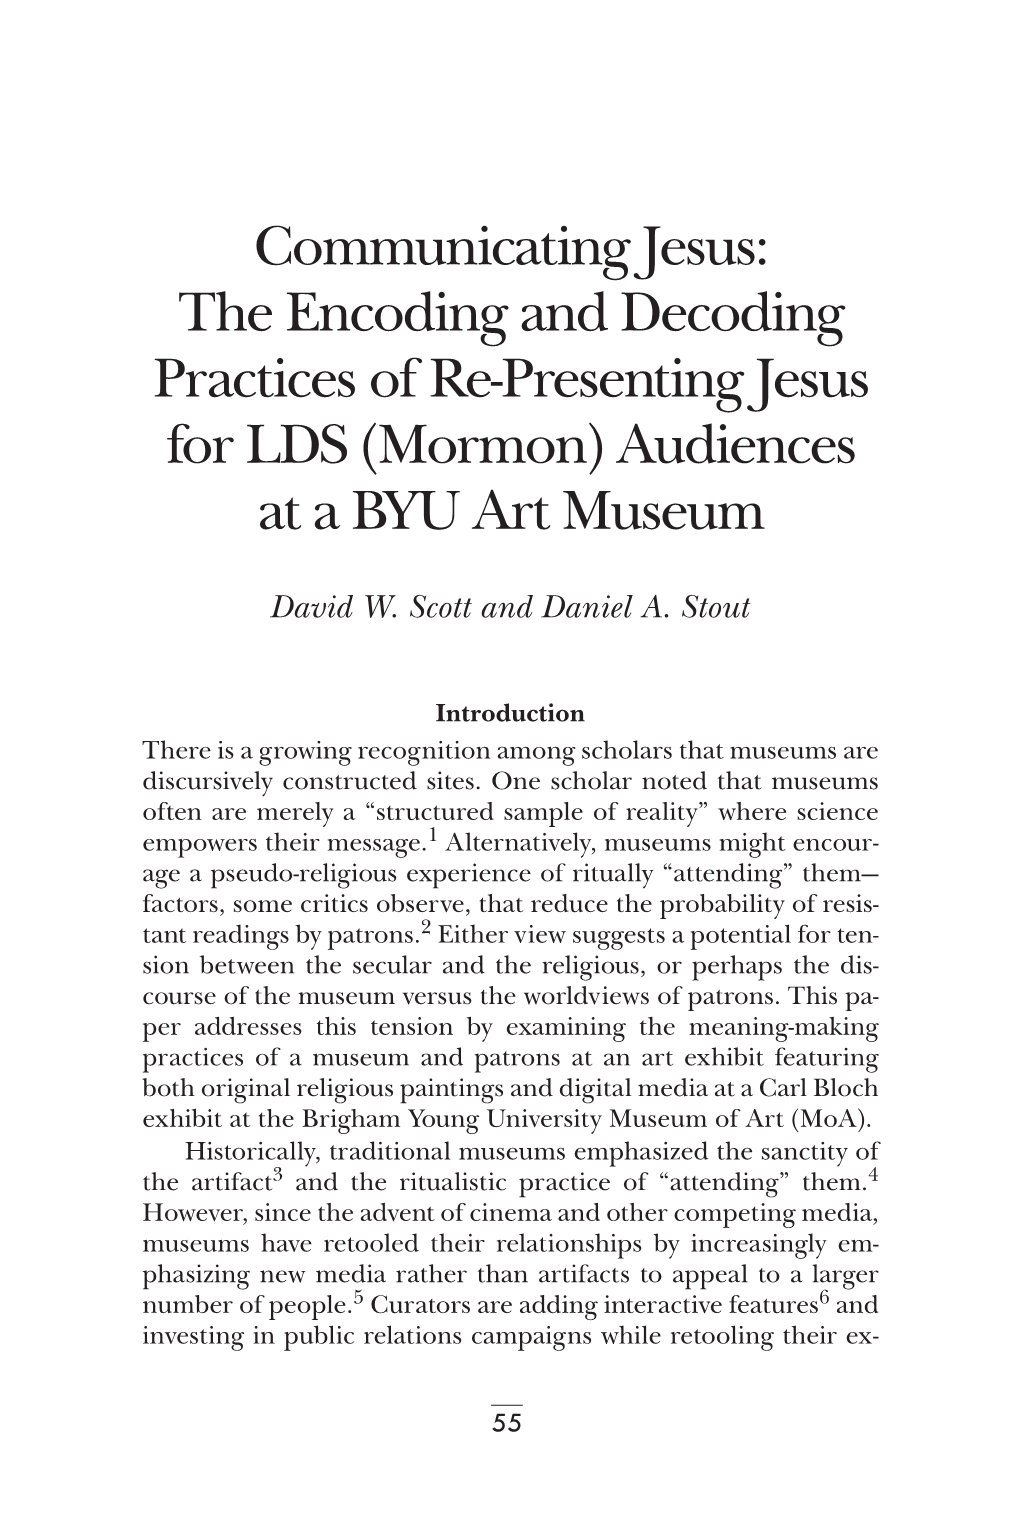 Communicating Jesus: the Encoding and Decoding Practices of Re-Presenting Jesus for LDS (Mormon) Audiences at a BYU Art Museum